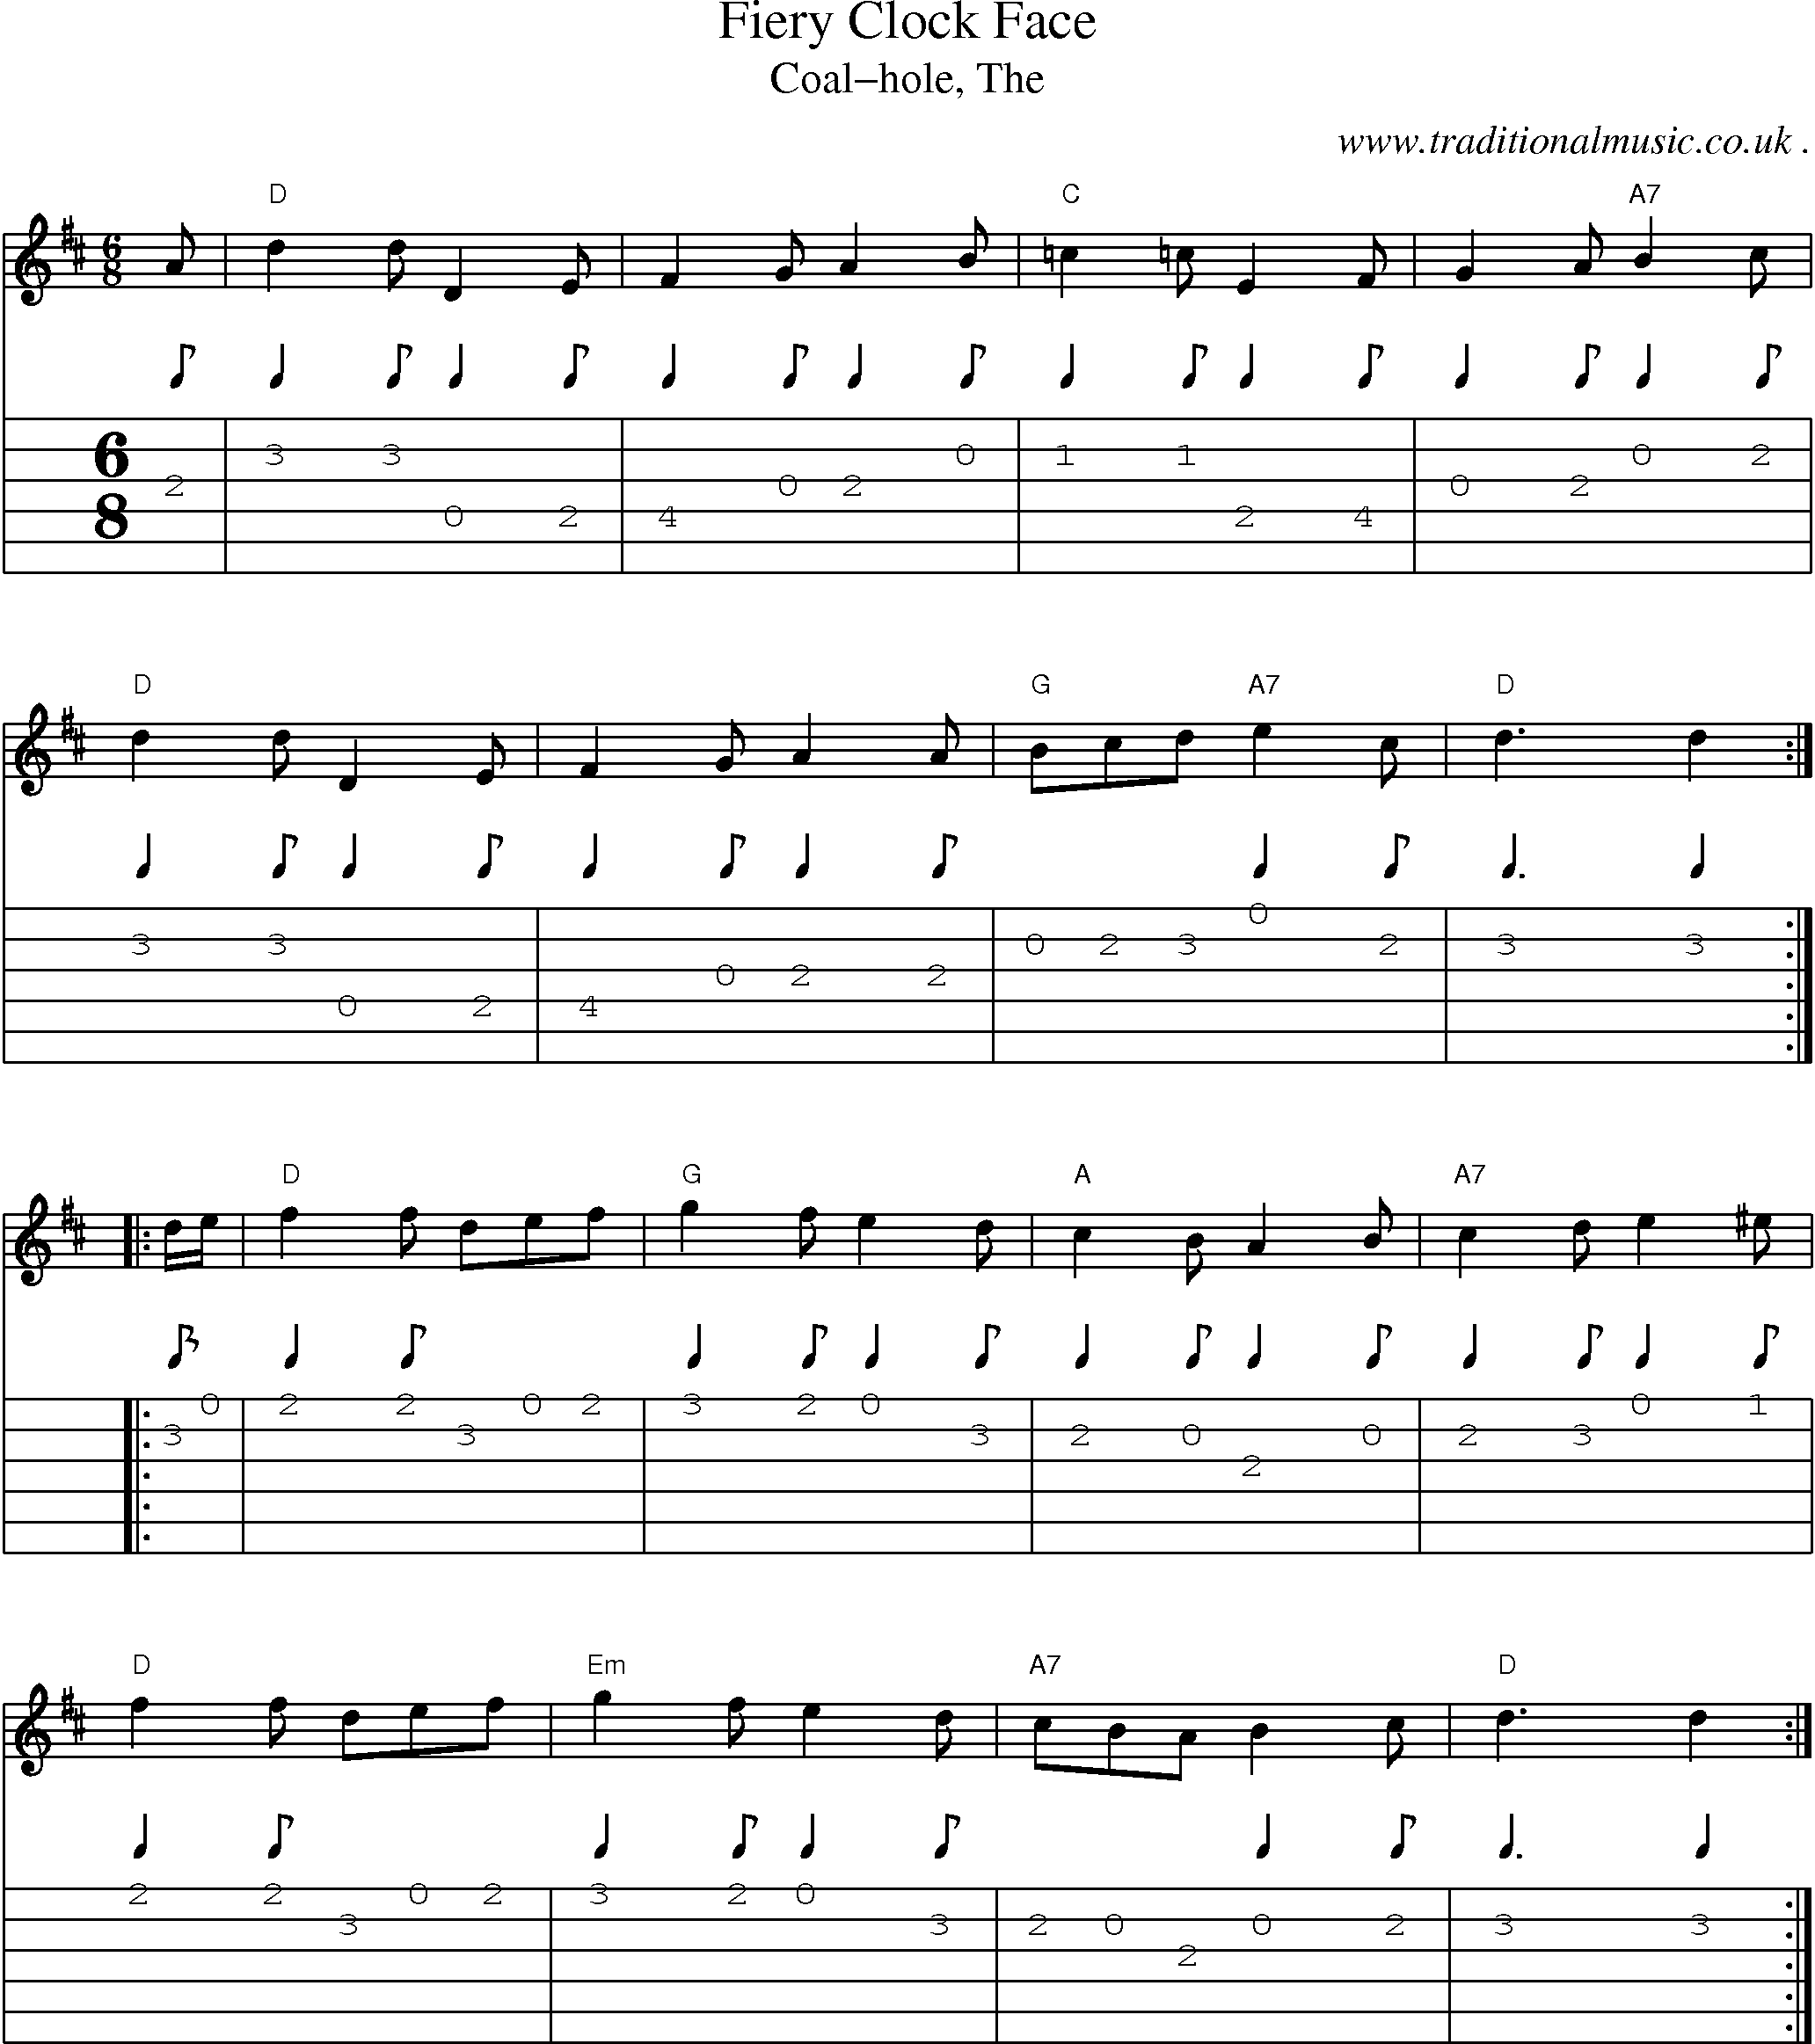 Music Score and Guitar Tabs for Fiery Clock Face